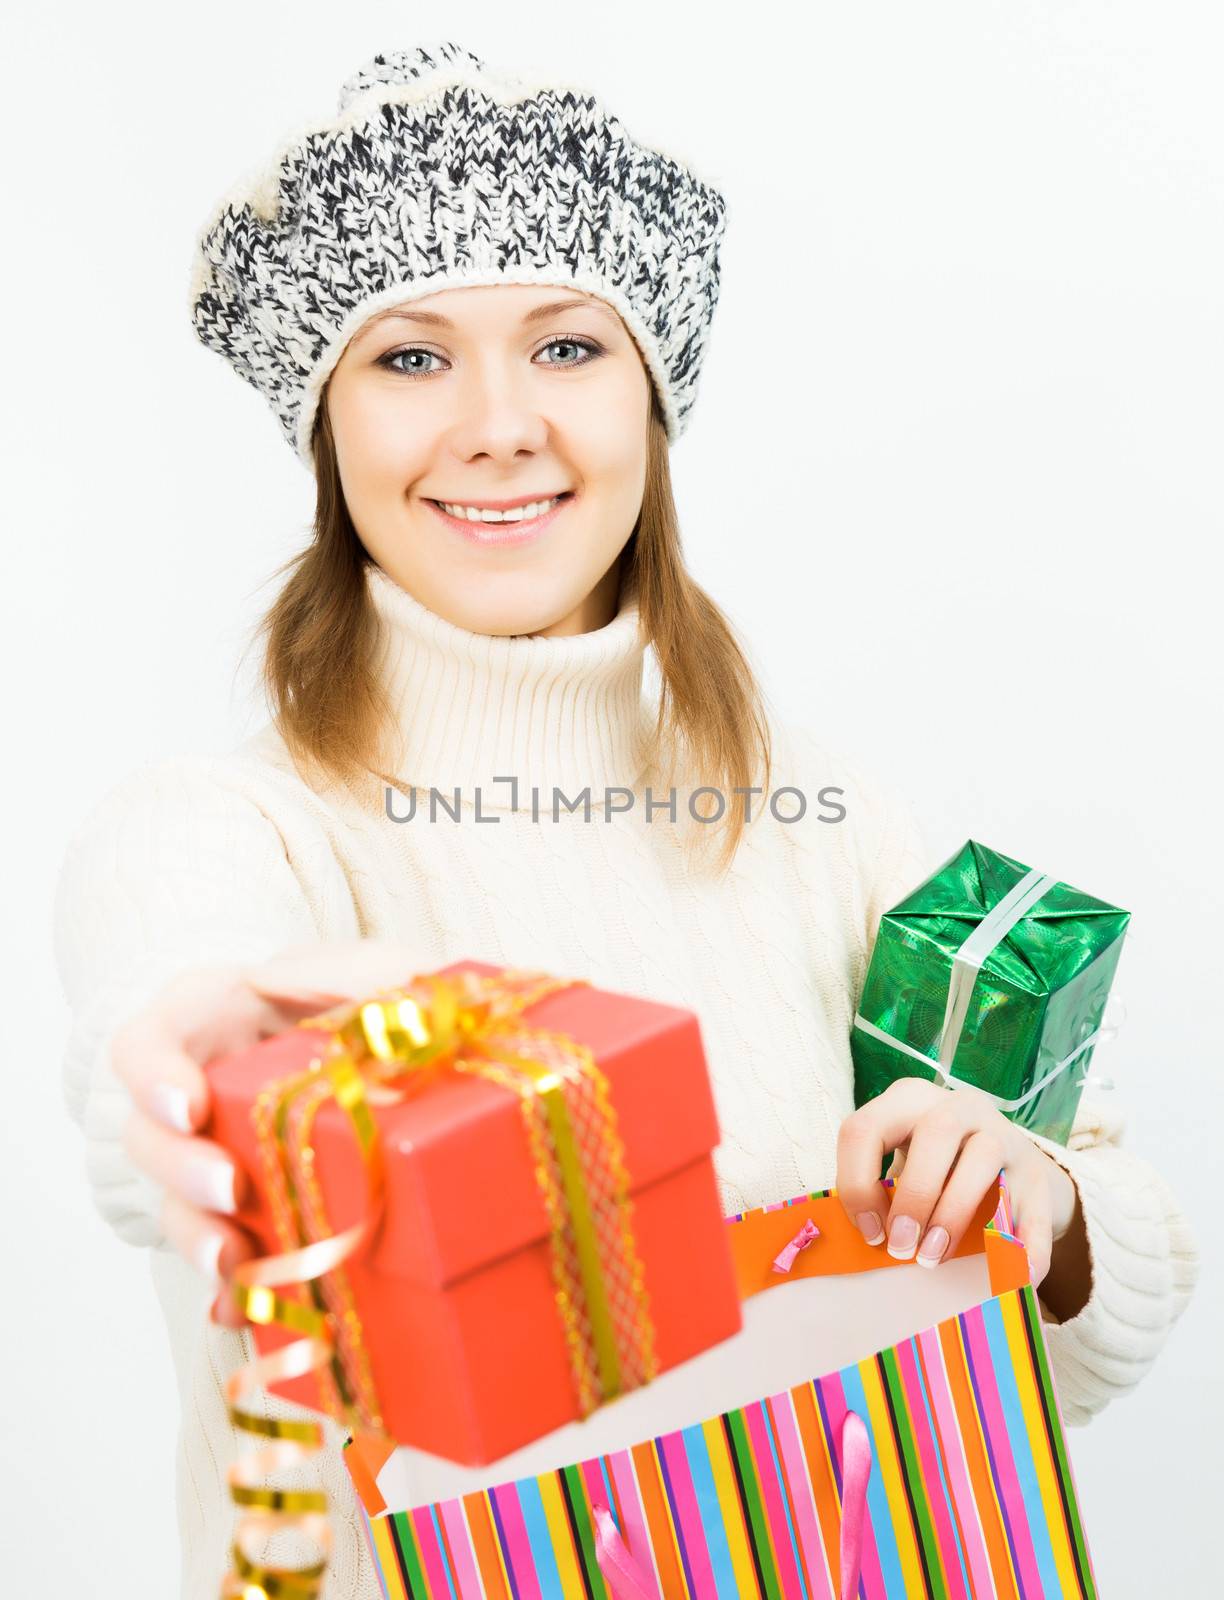 Charming smiling girl in winter cap holding a gift box